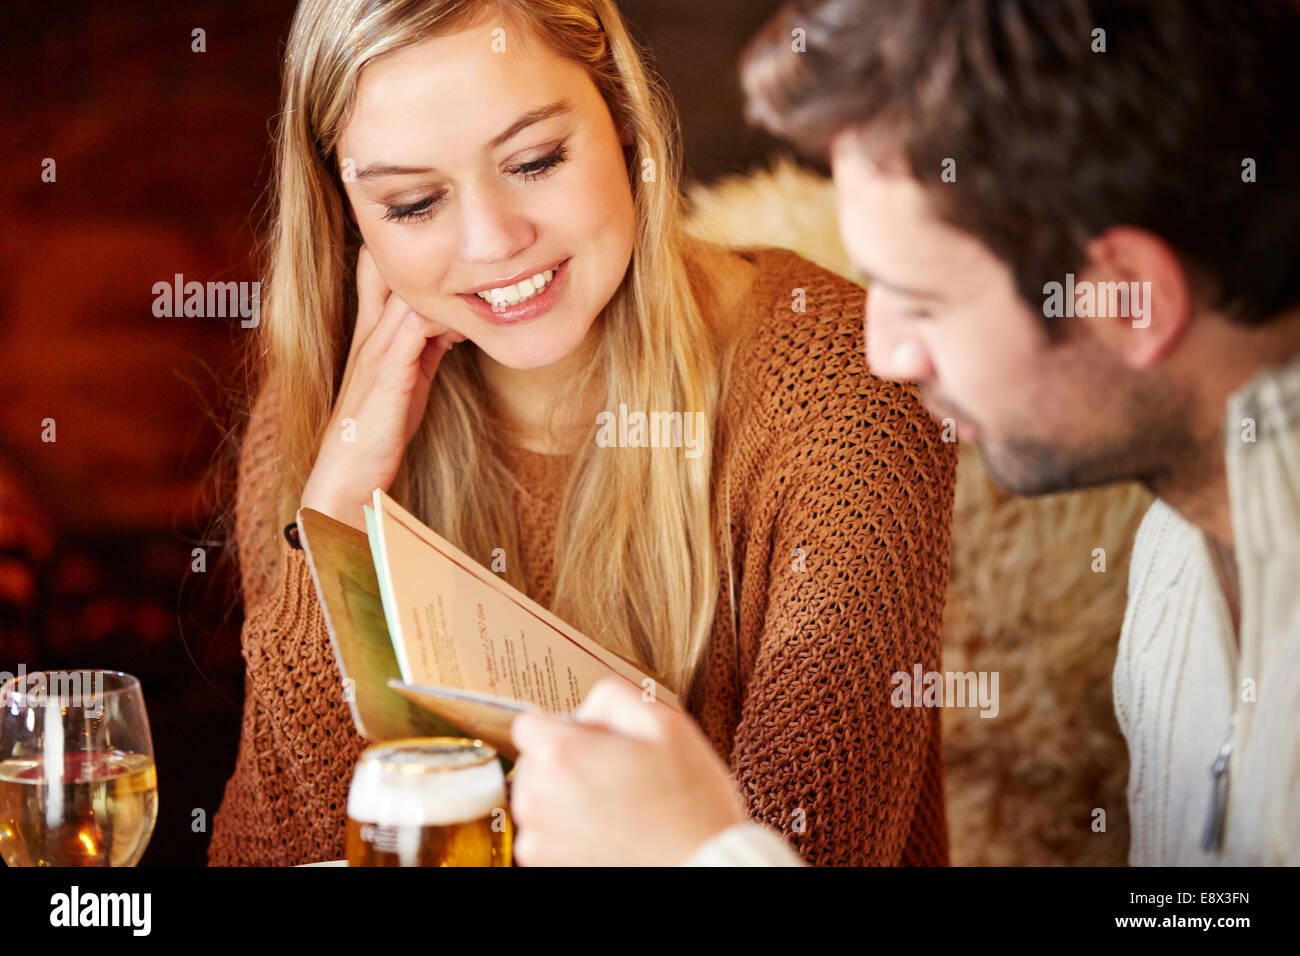 Couple looking at restaurant menu together Stock Photo